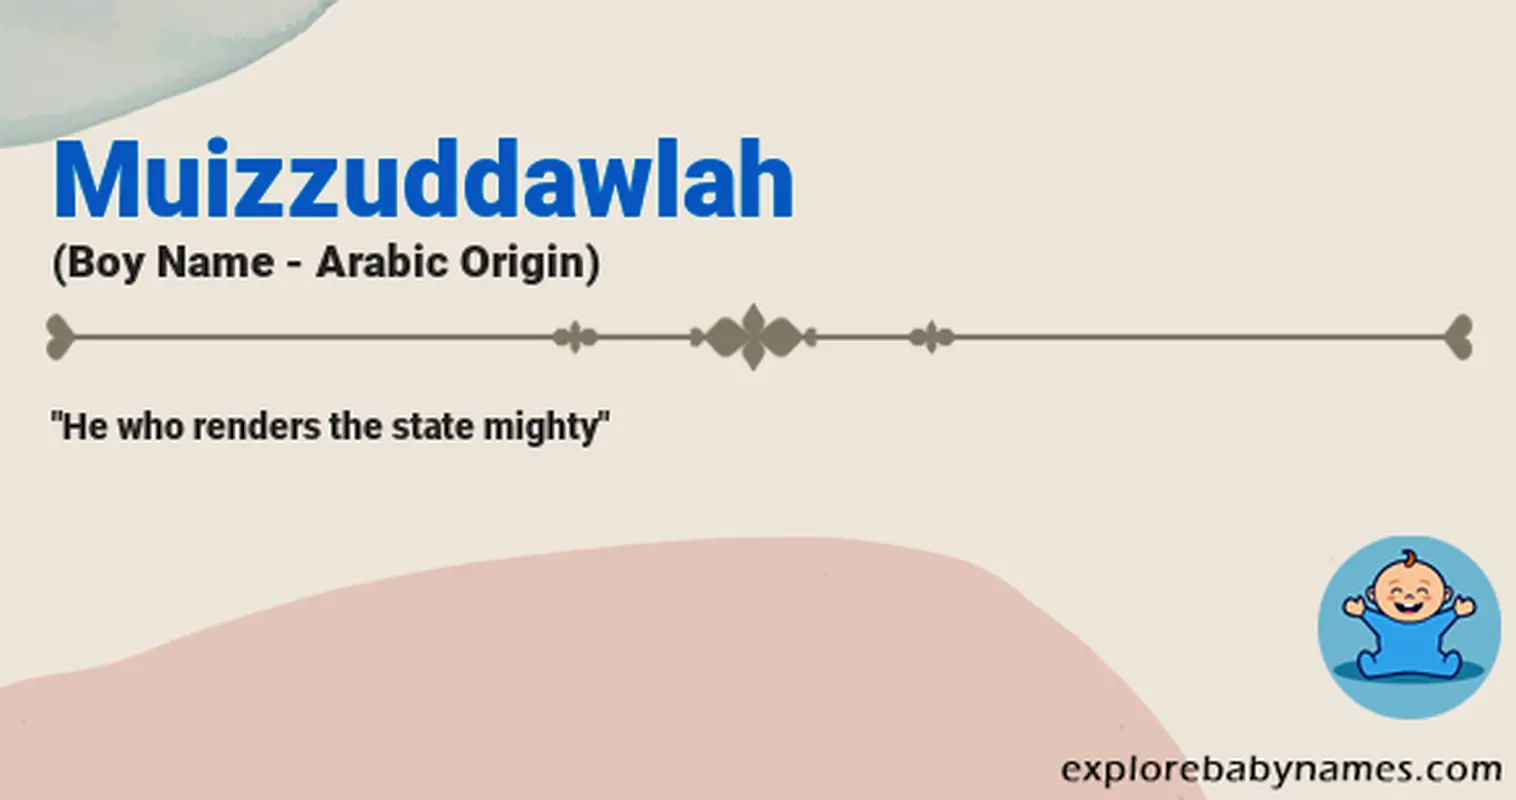 Meaning of Muizzuddawlah